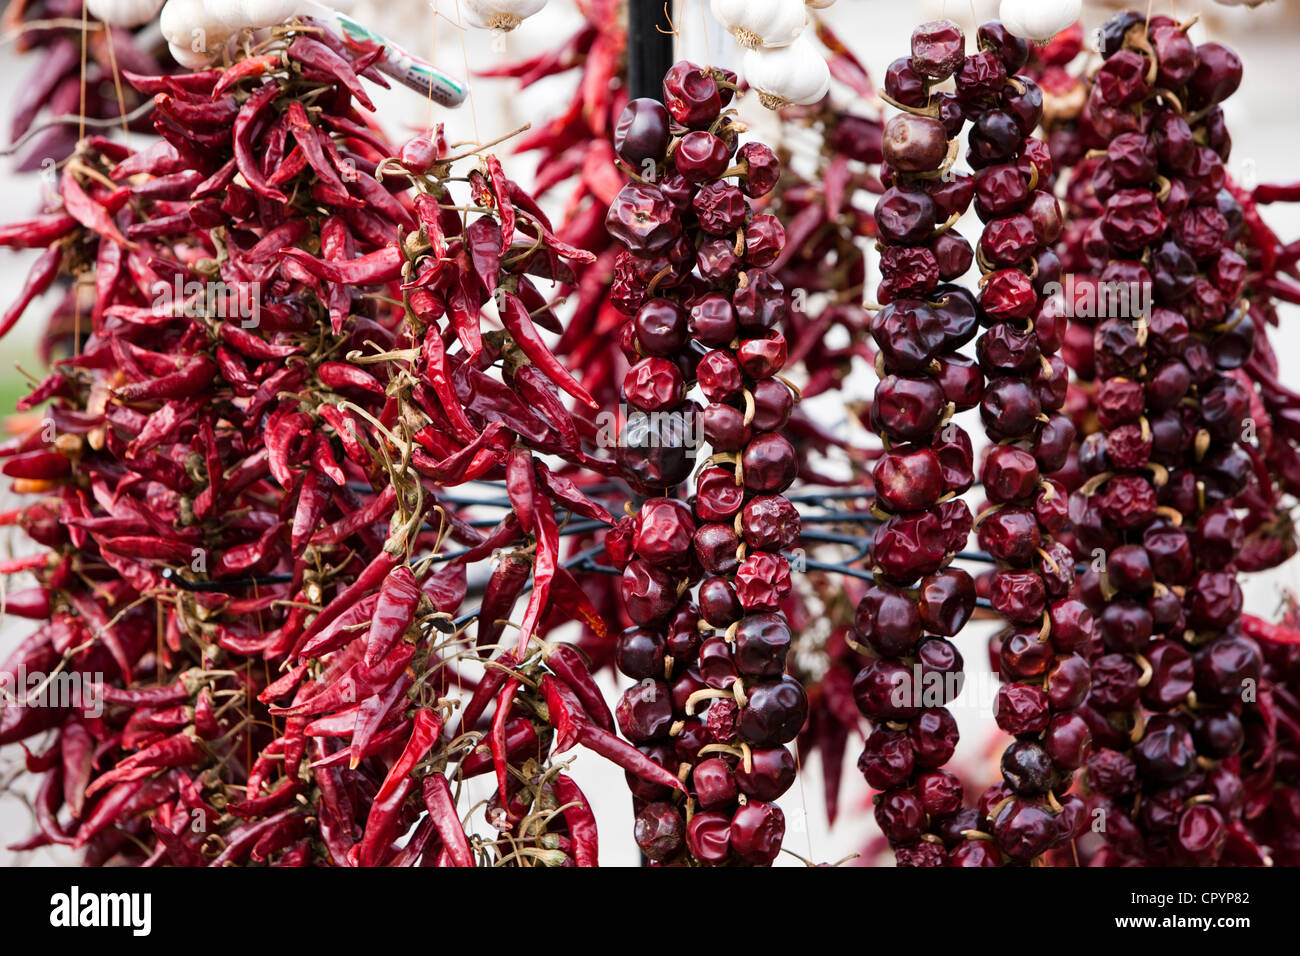 Dried peppers on a market stall, Lake Neusiedl, Hungary, Europe Stock Photo